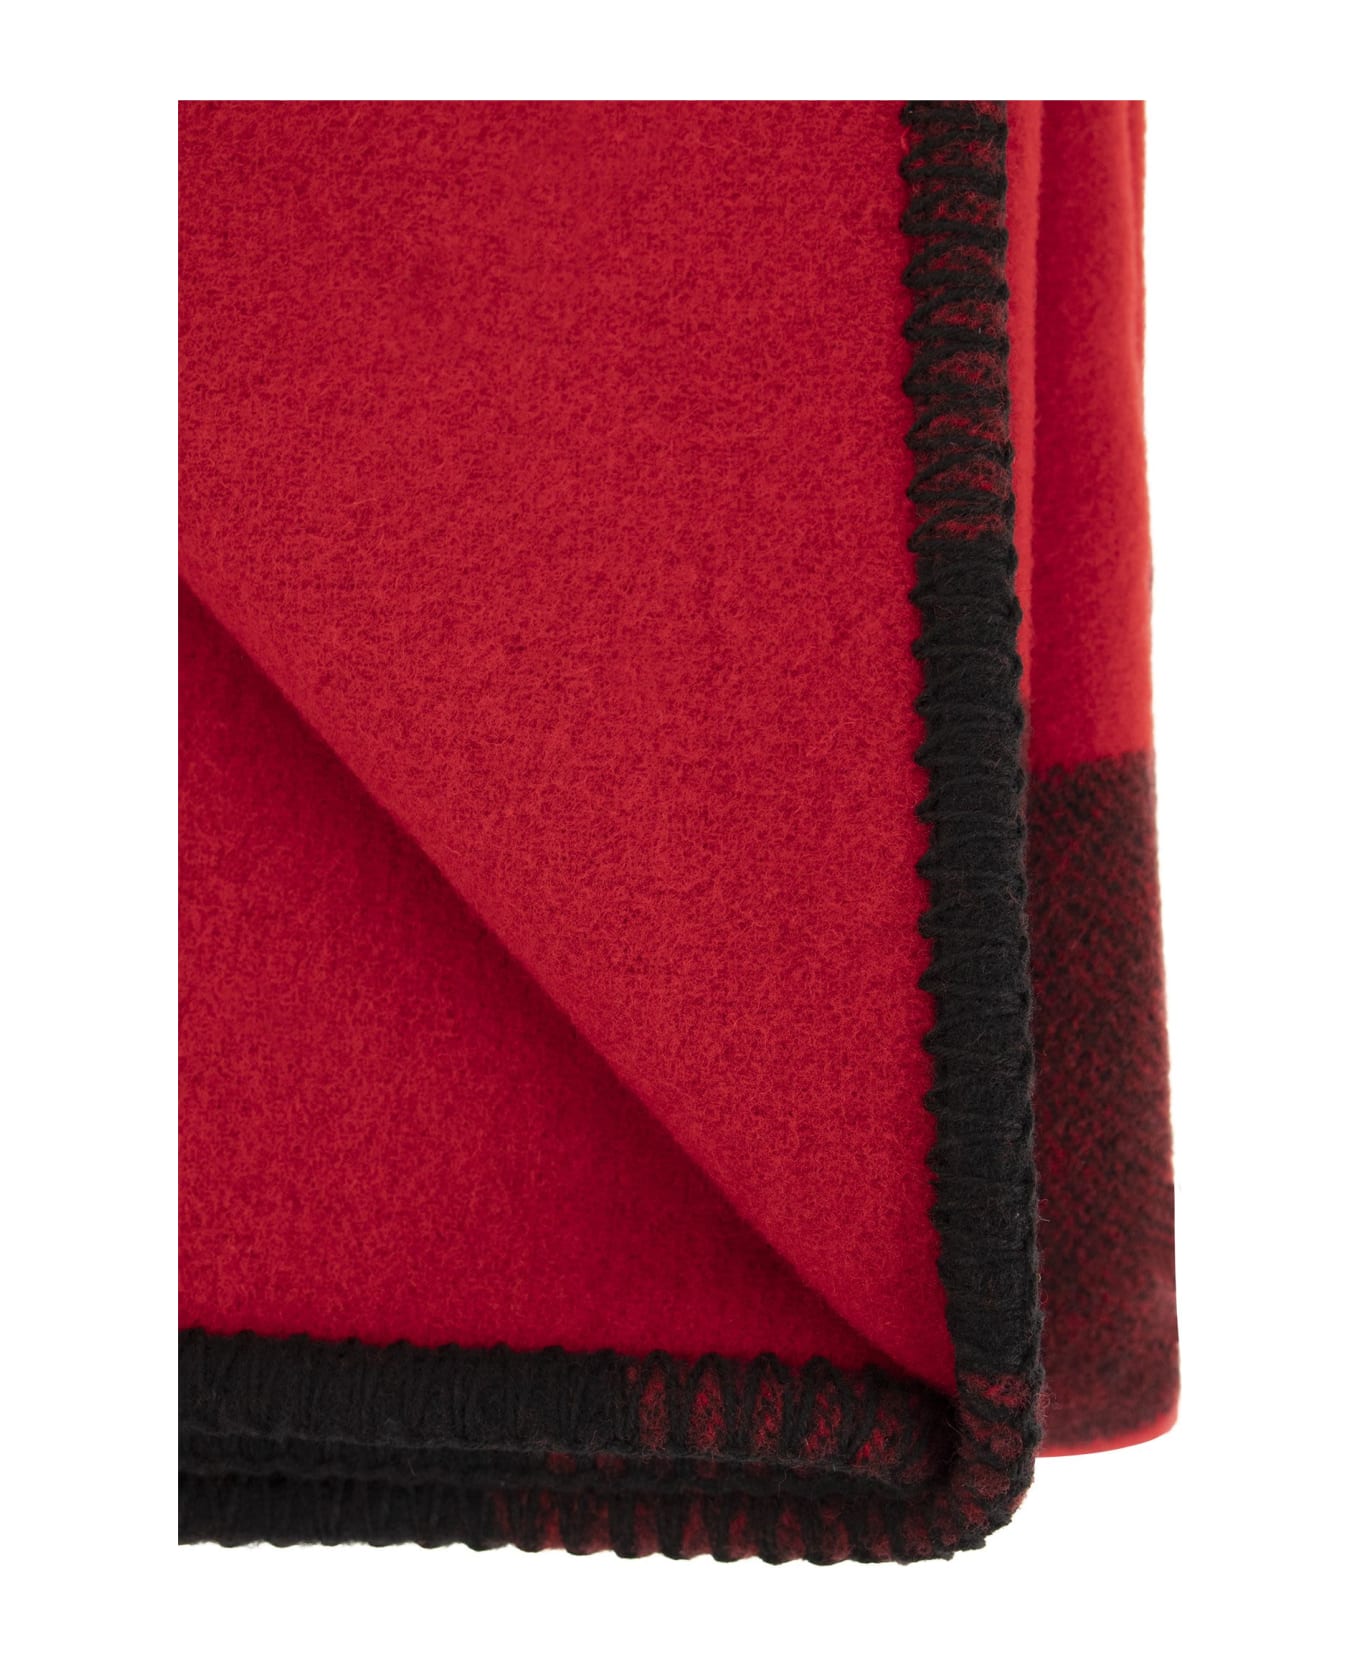 Woolrich Pure Wool Check Scarf - Red/black スカーフ